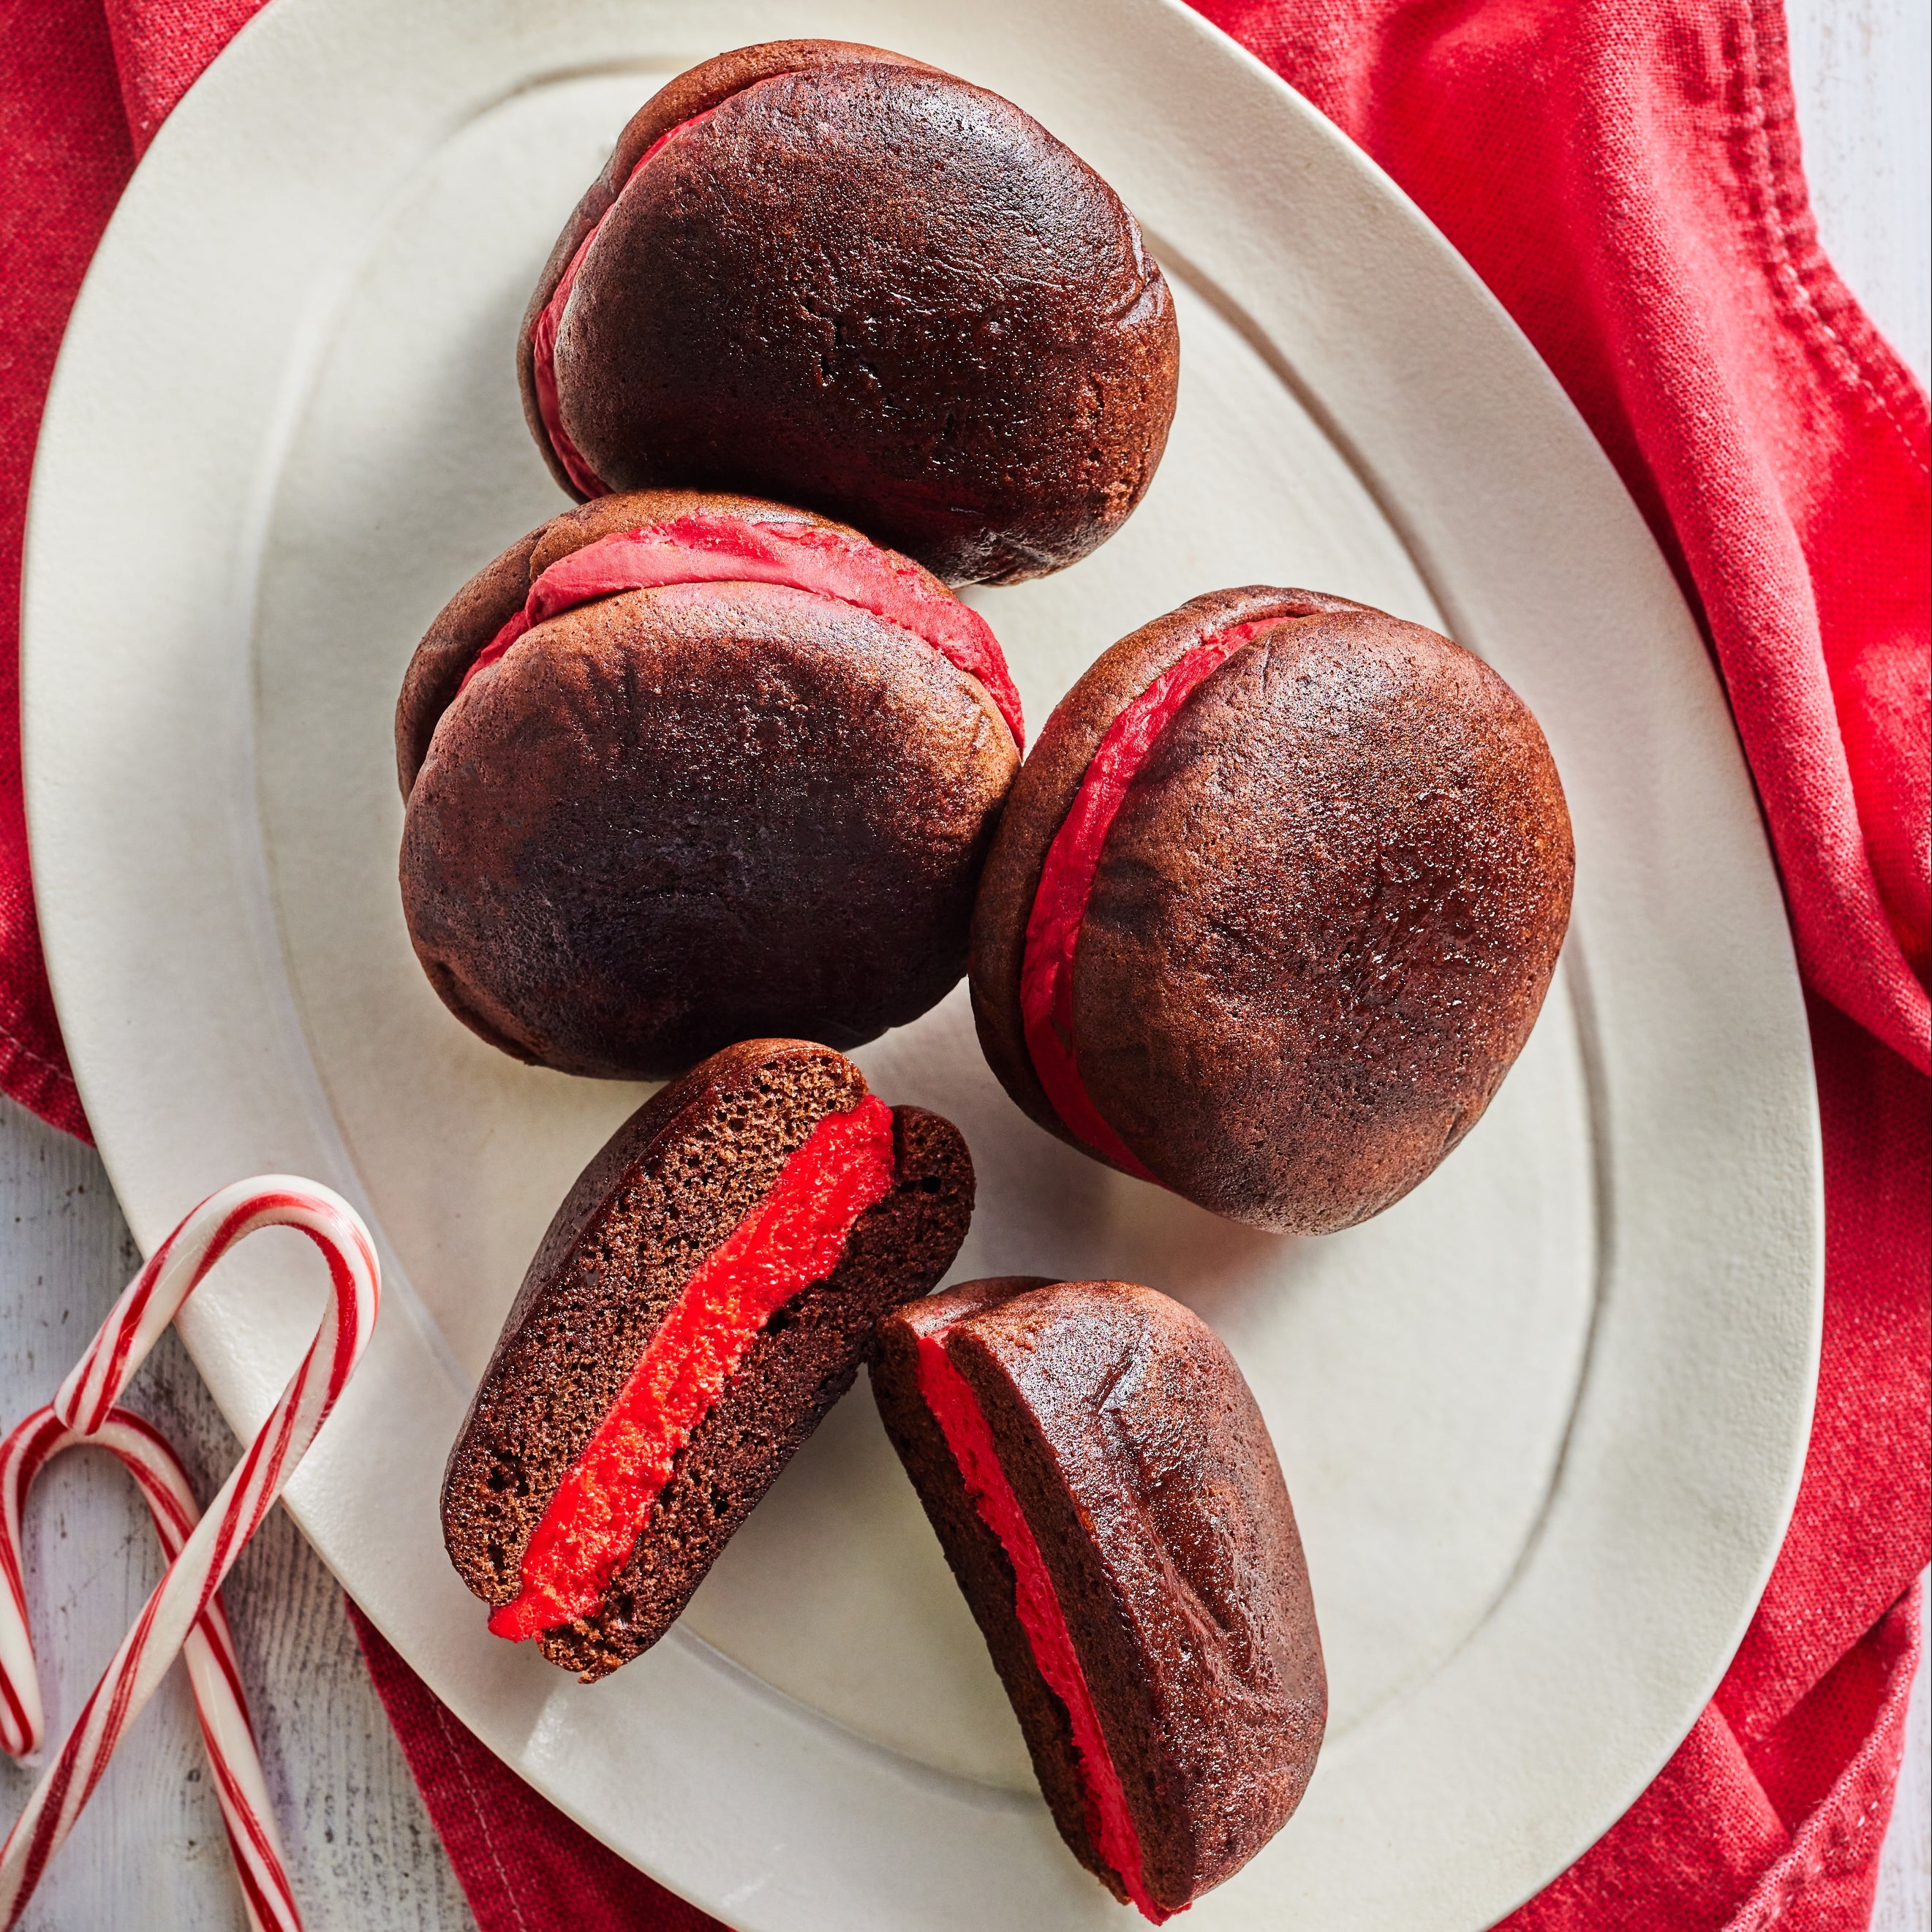 Four Chocolate Peppermint Whoopie pies plated alongside a red linen and 2 candy canes